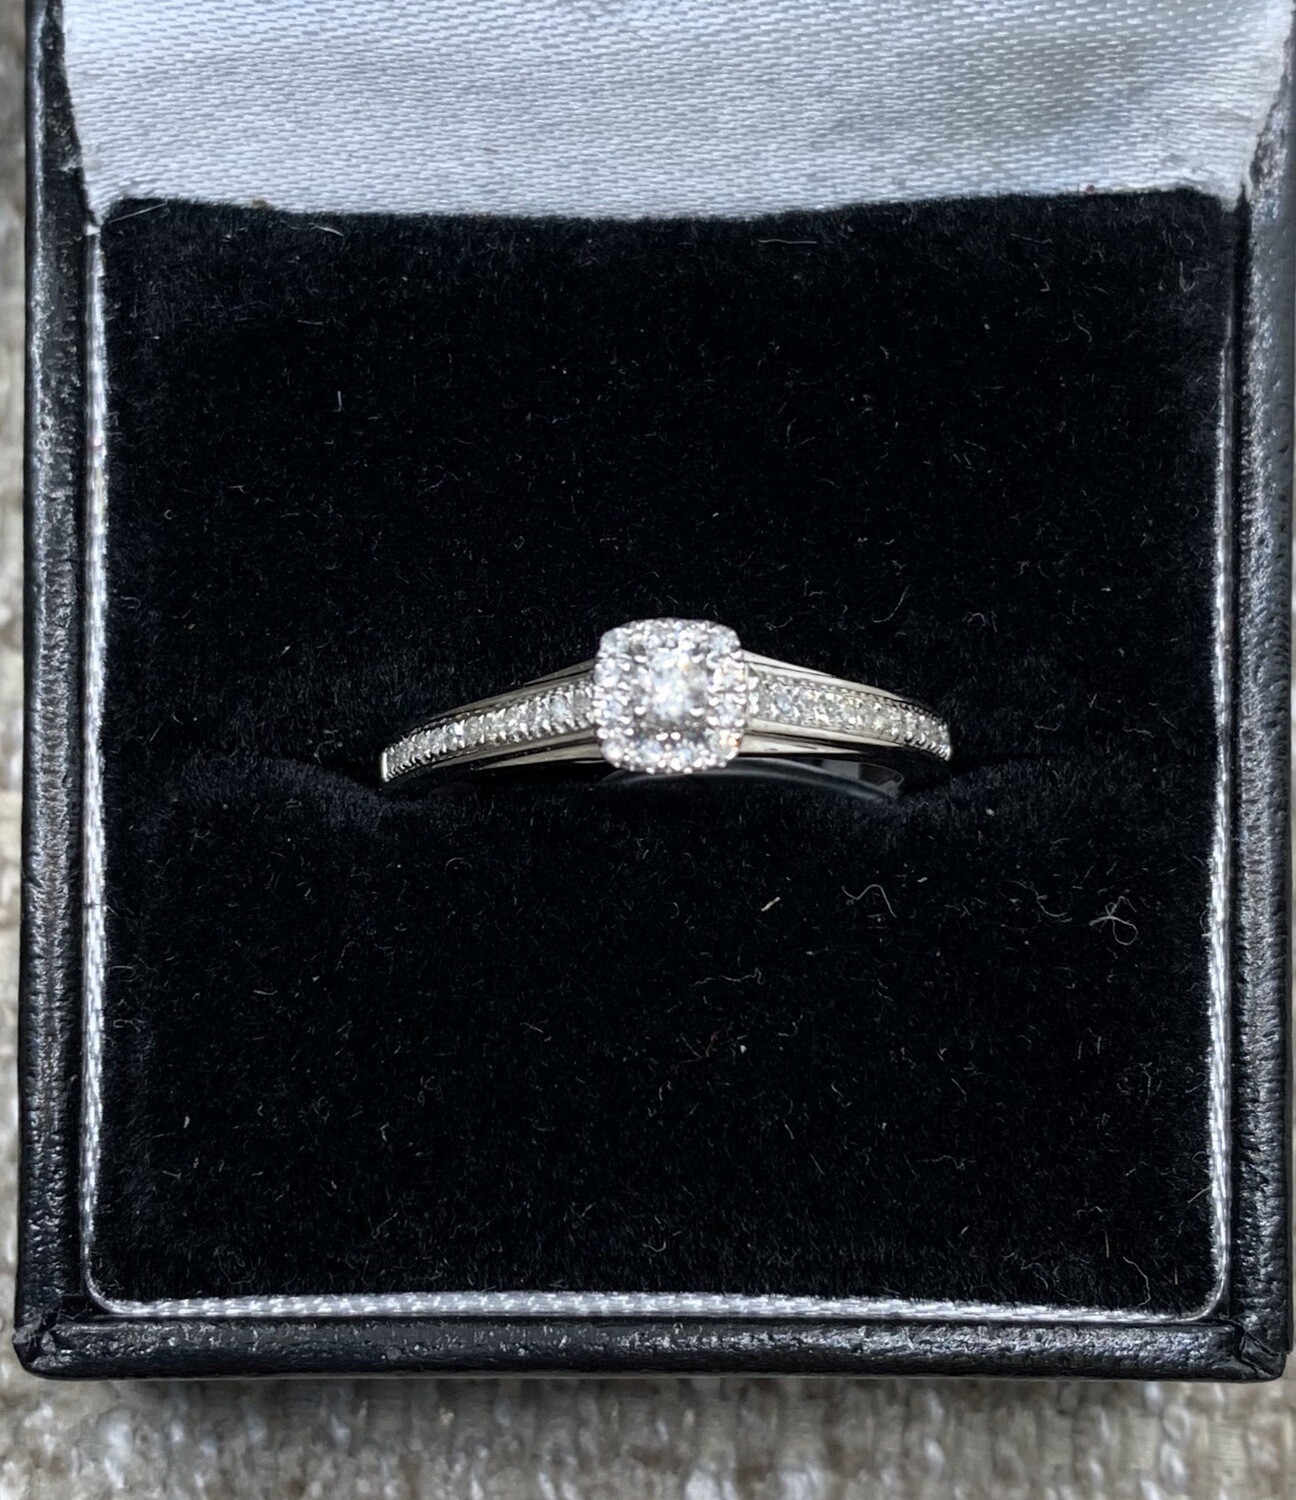 Diamond Engagement Ring 19 pts. Total Weight Halo Design set in 14Kt. White Gold